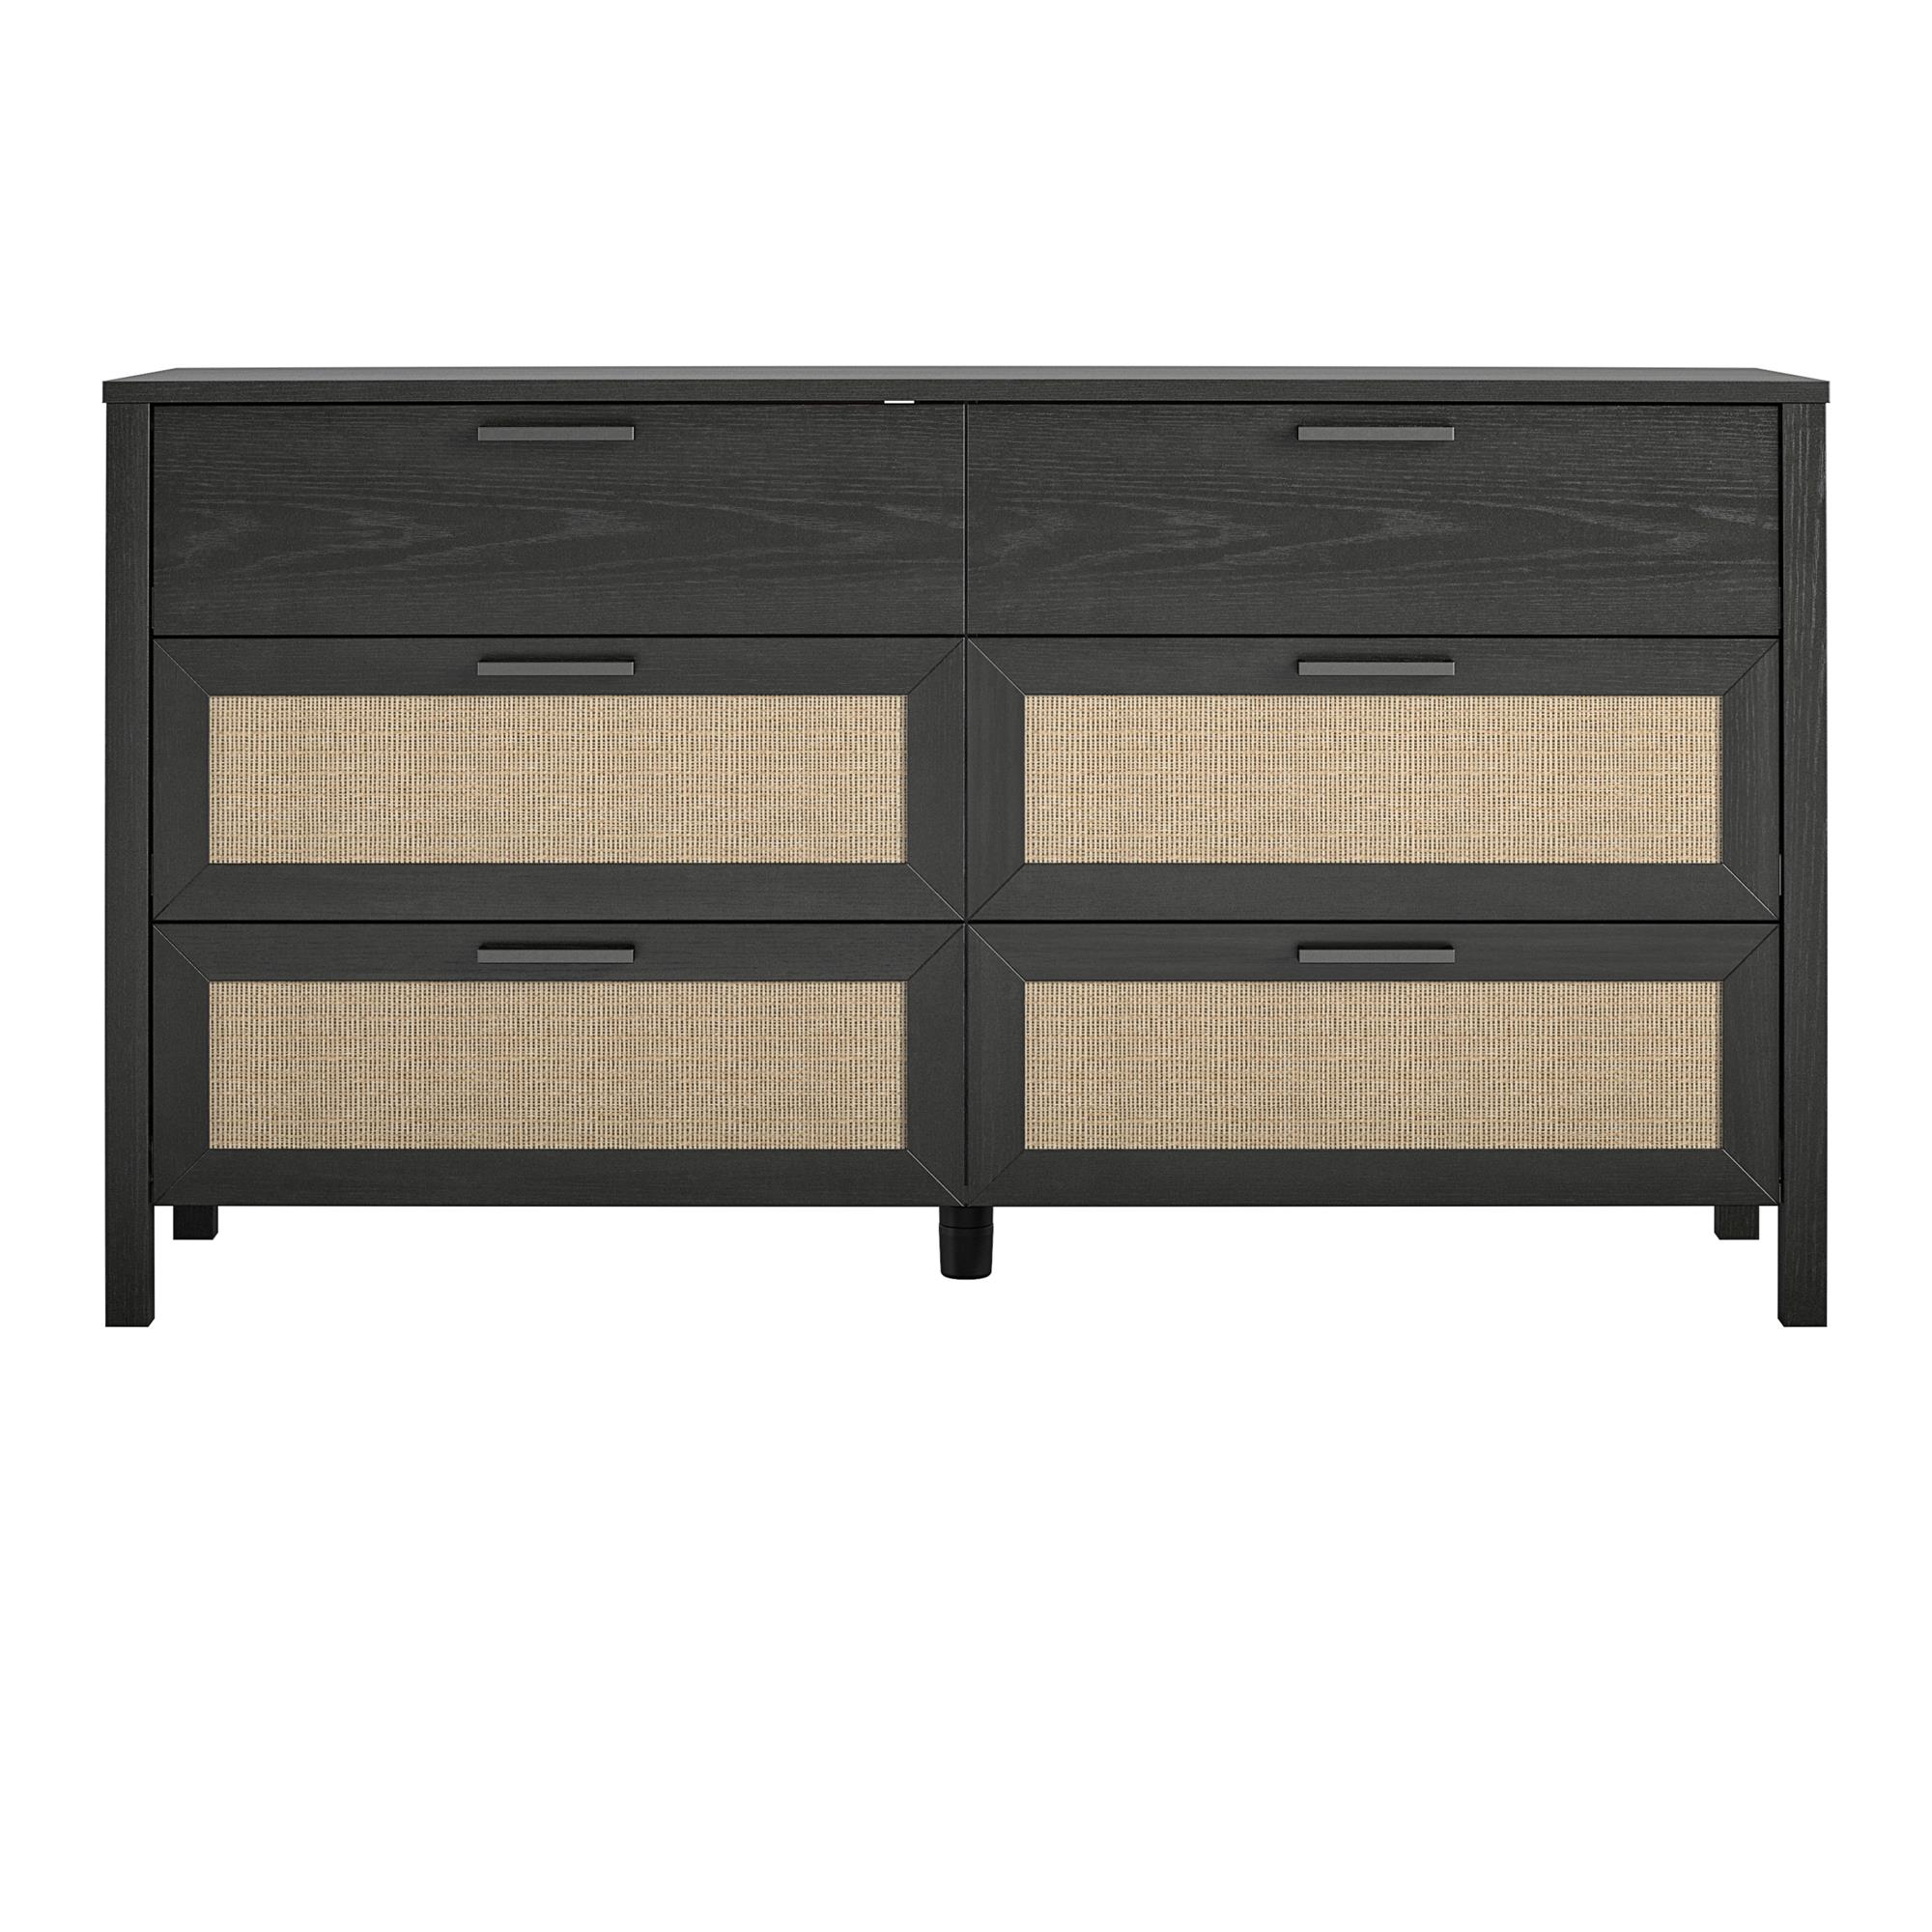 Ameriwood Home Wimberly 6-Drawer Dresser, Black Oak with Faux Rattan - image 3 of 16